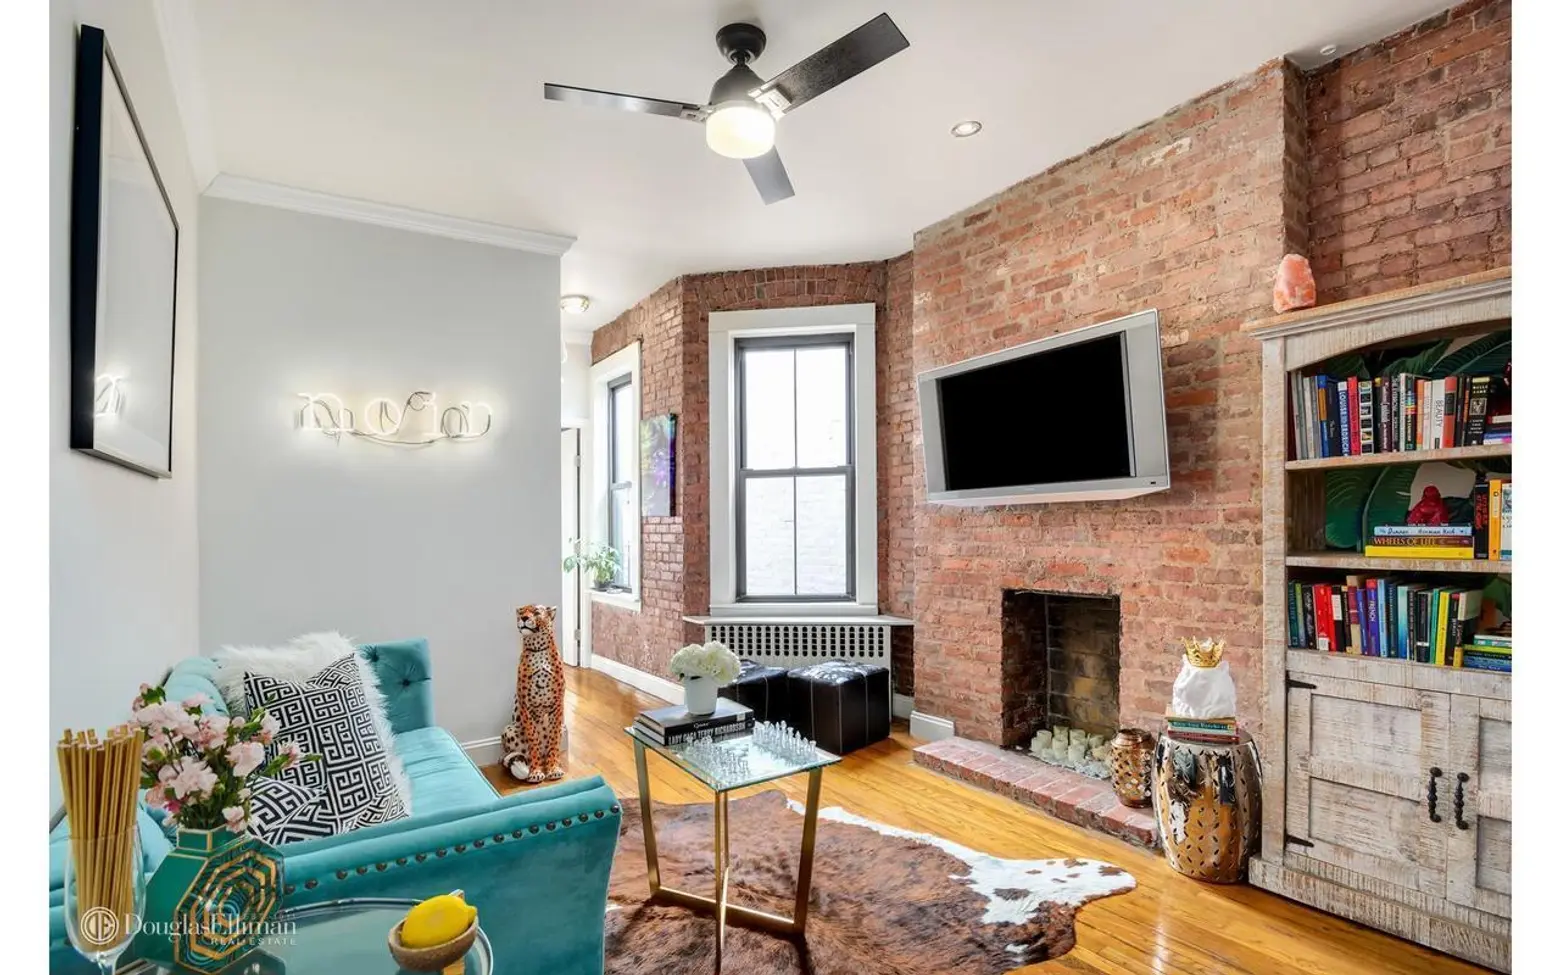 The $600K pricetag is just as charming as the design at this Chelsea co-op